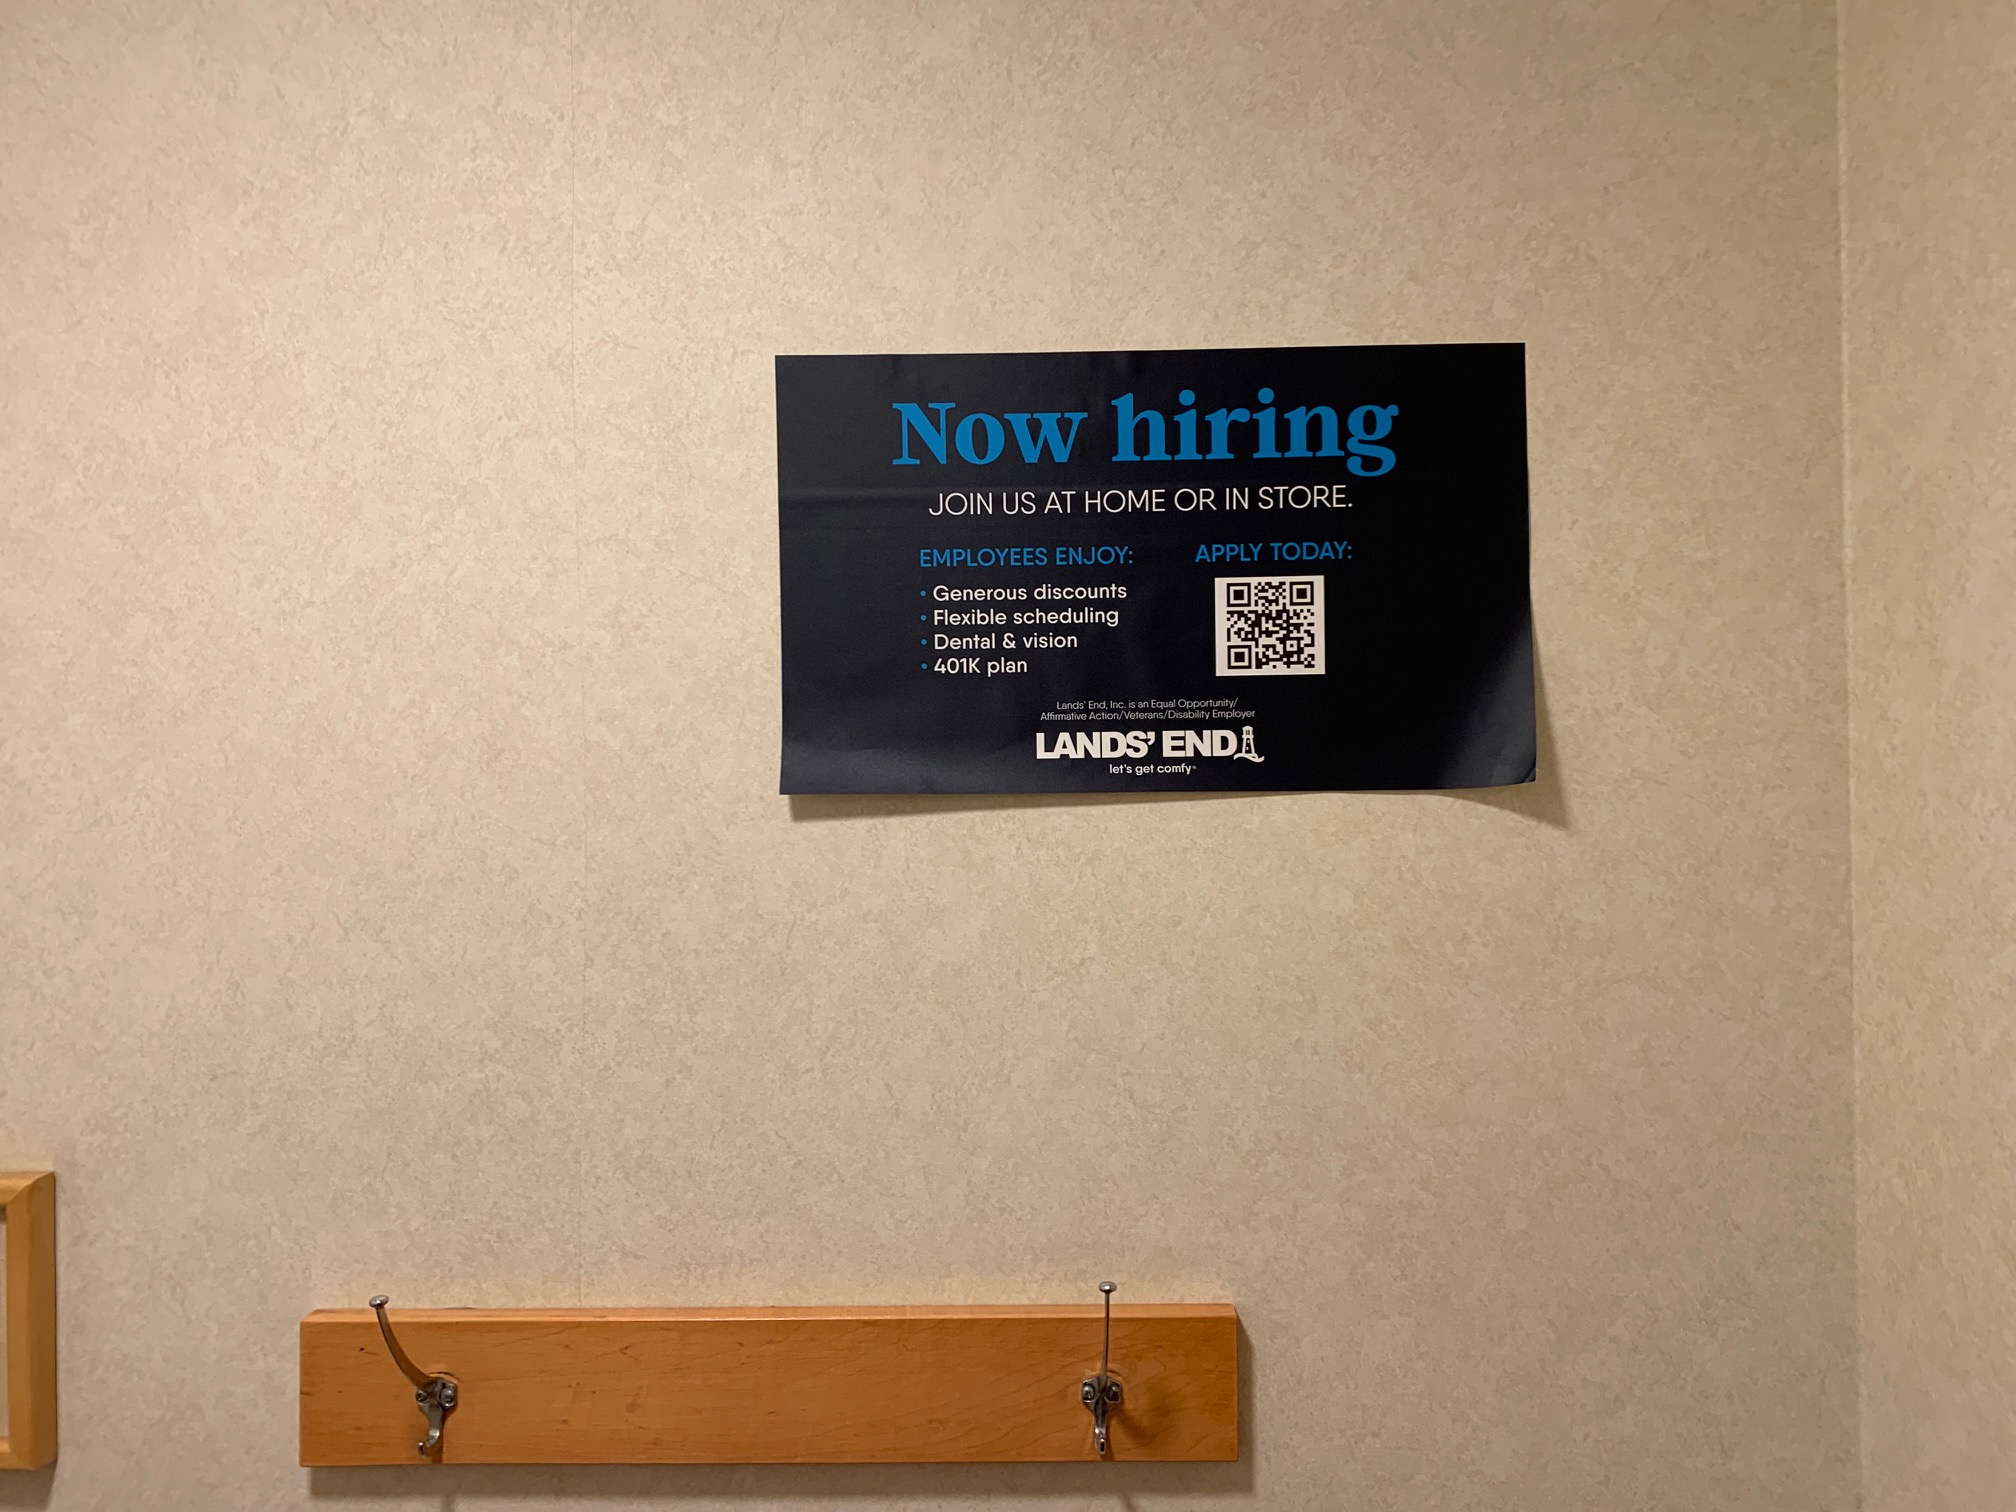 The same 'now hiring' sign on a wall, wrinkled and peeling from having been removed from the mirror and moved over here.